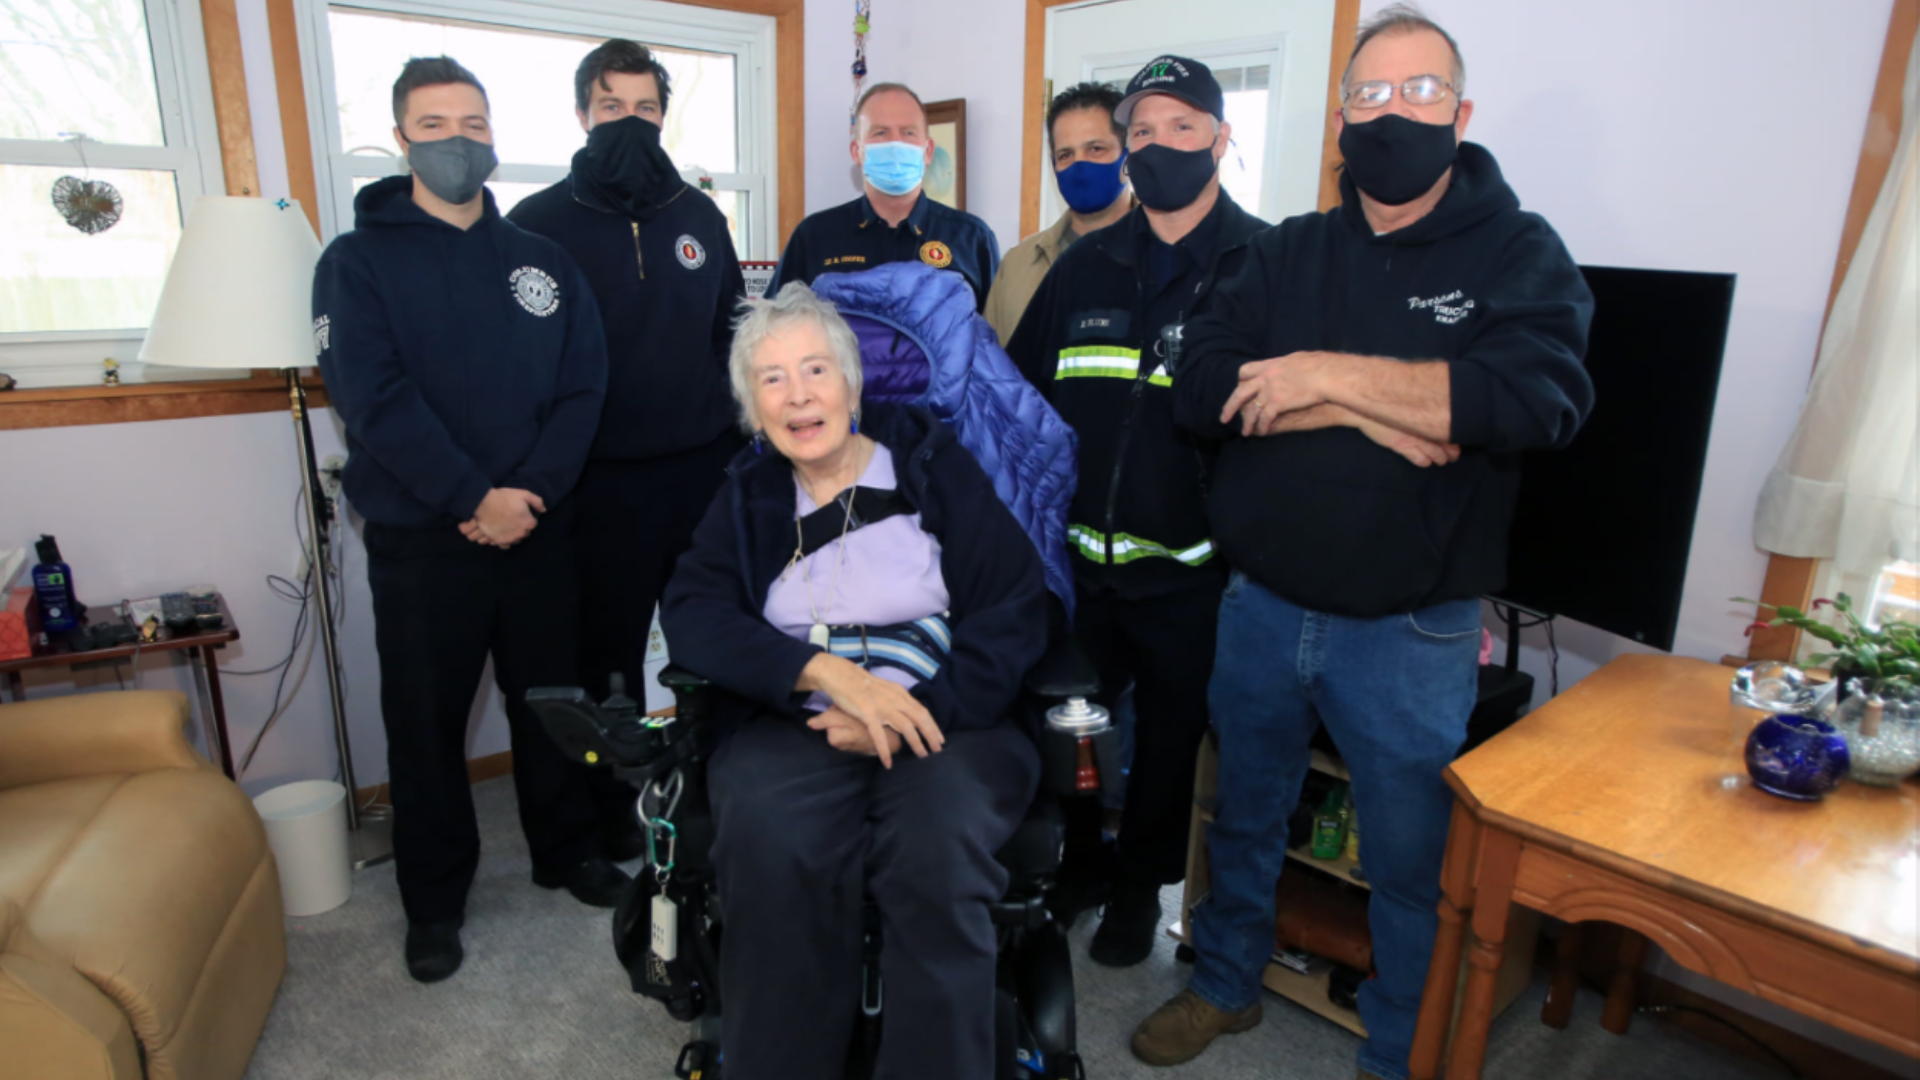 Kay Werk helped many firefighters during her career, and after a fall and positive COVID-19 test, her friends knew it was time to return the favor.